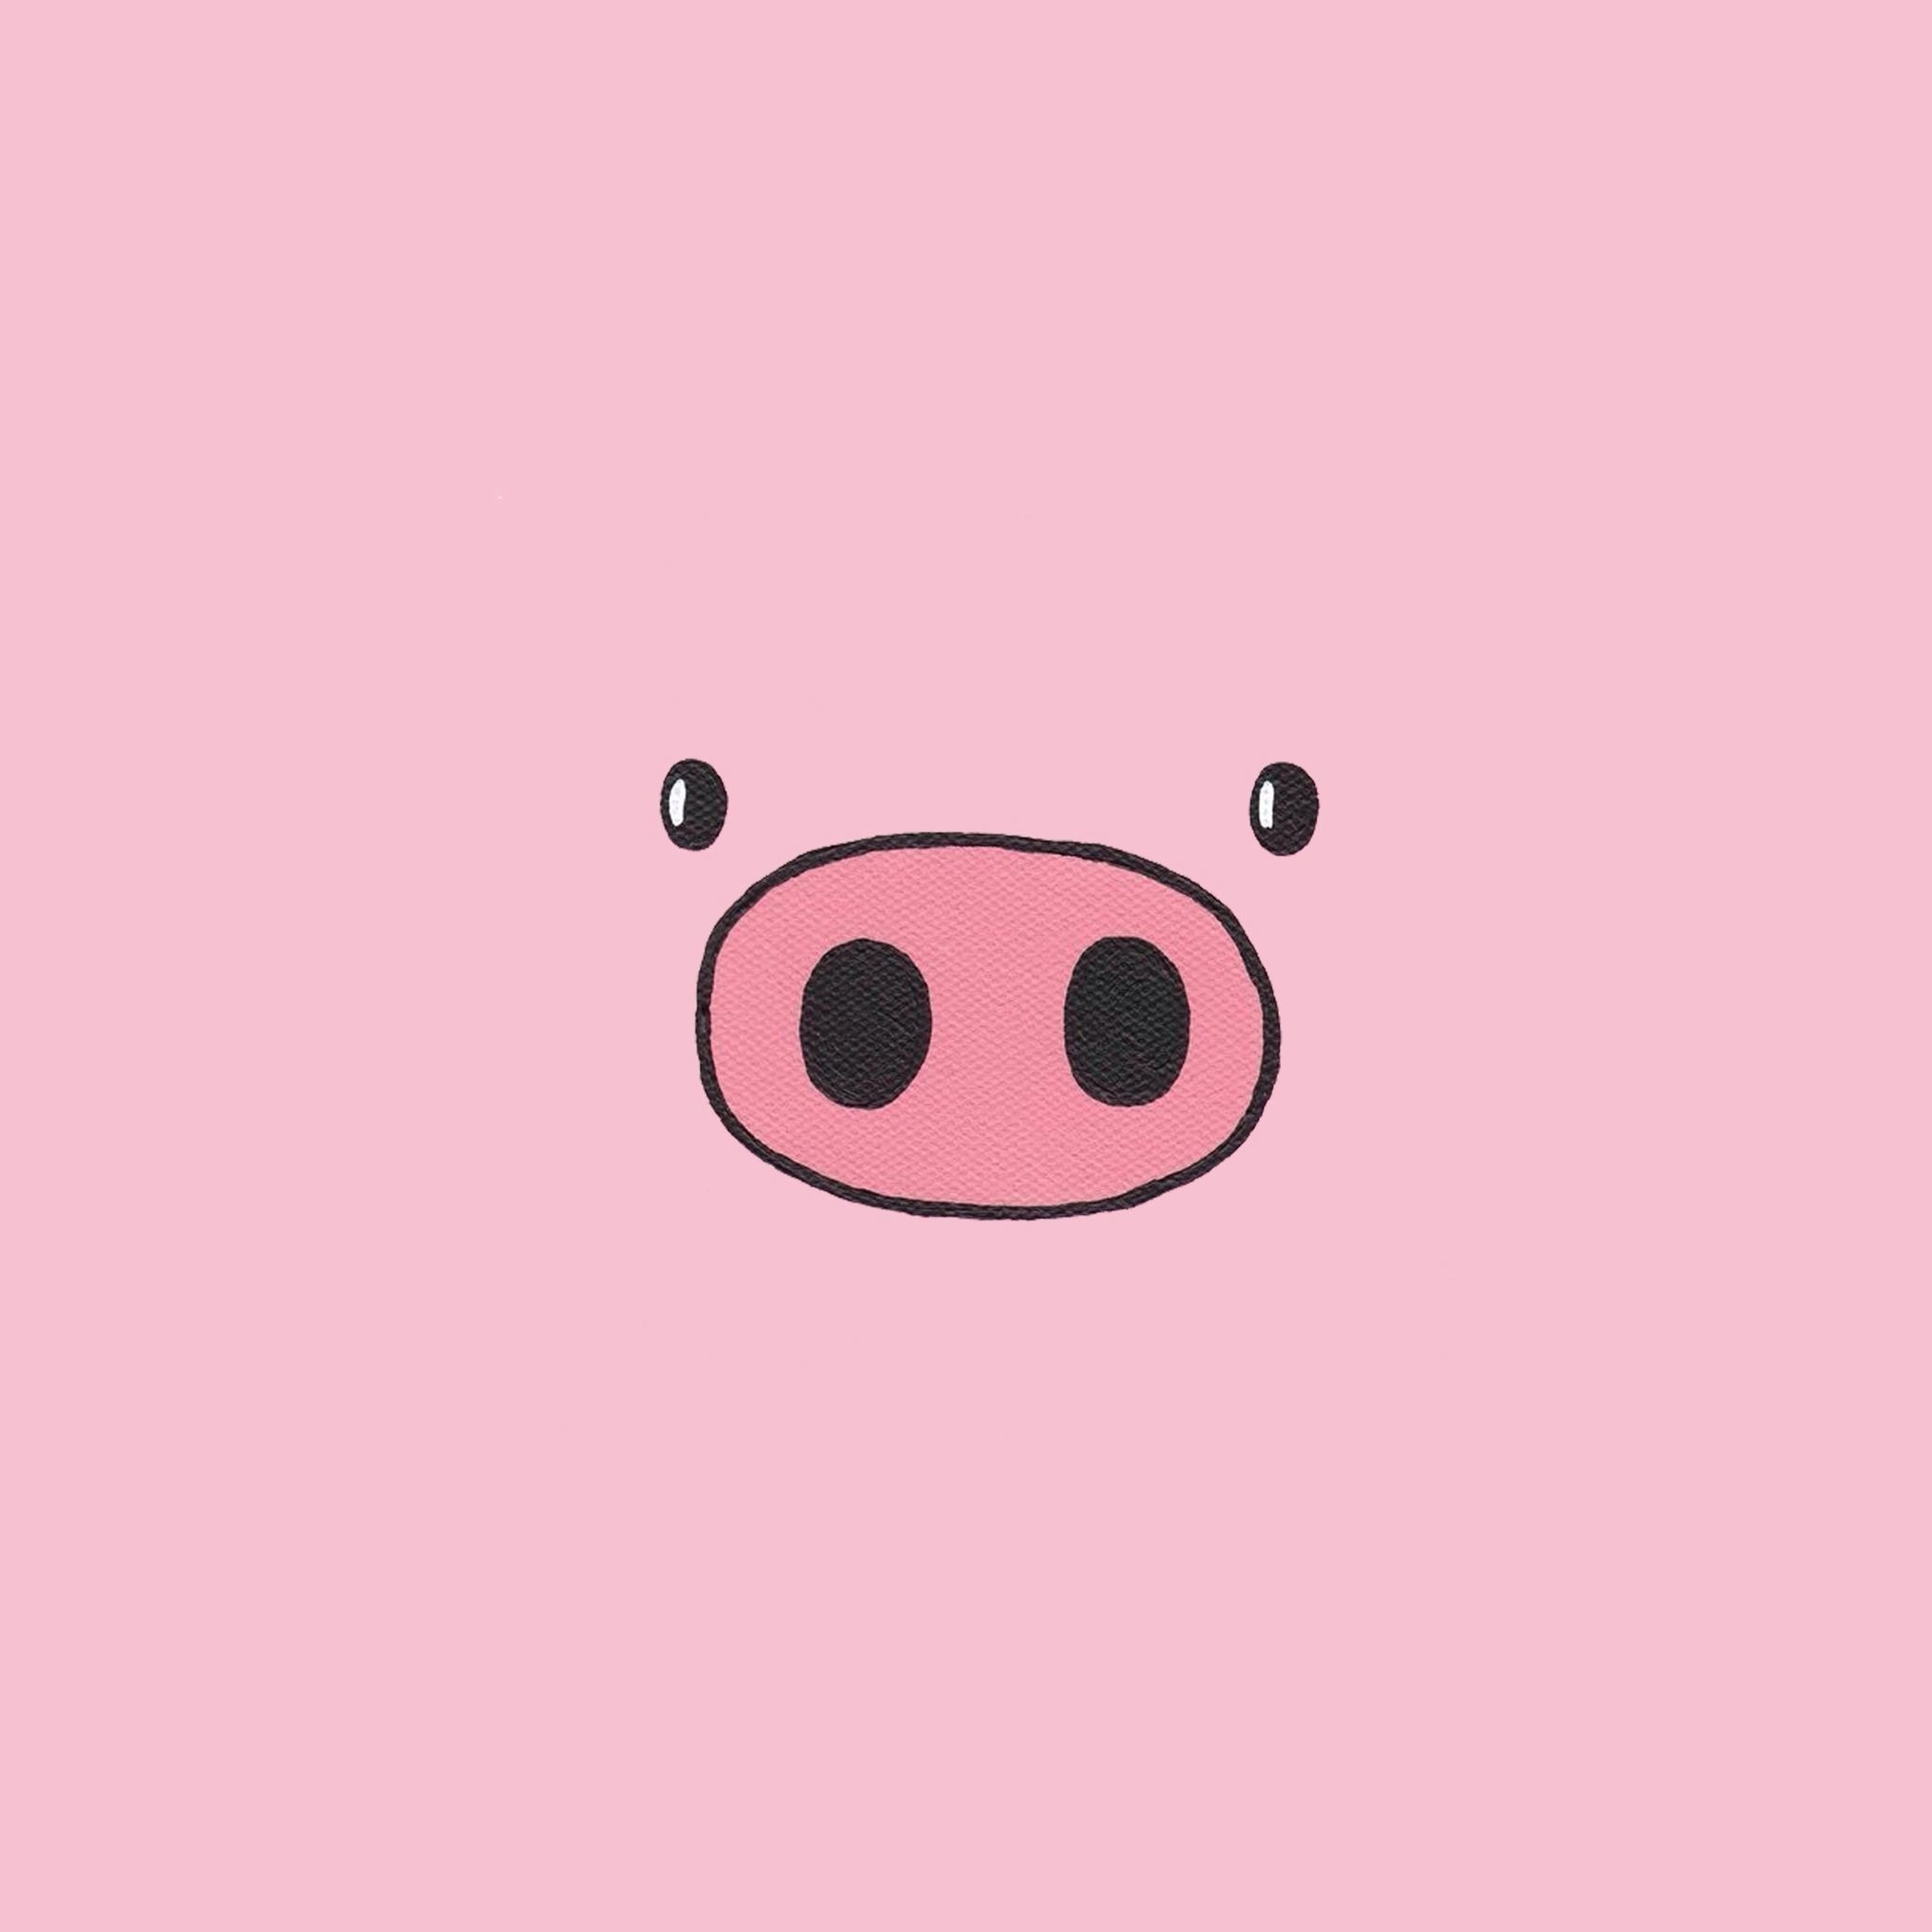 Pig iPhone wallpapers, Stylish piggy cuteness, Oink-tastic backgrounds, Playful snouts, 2050x2050 HD Phone